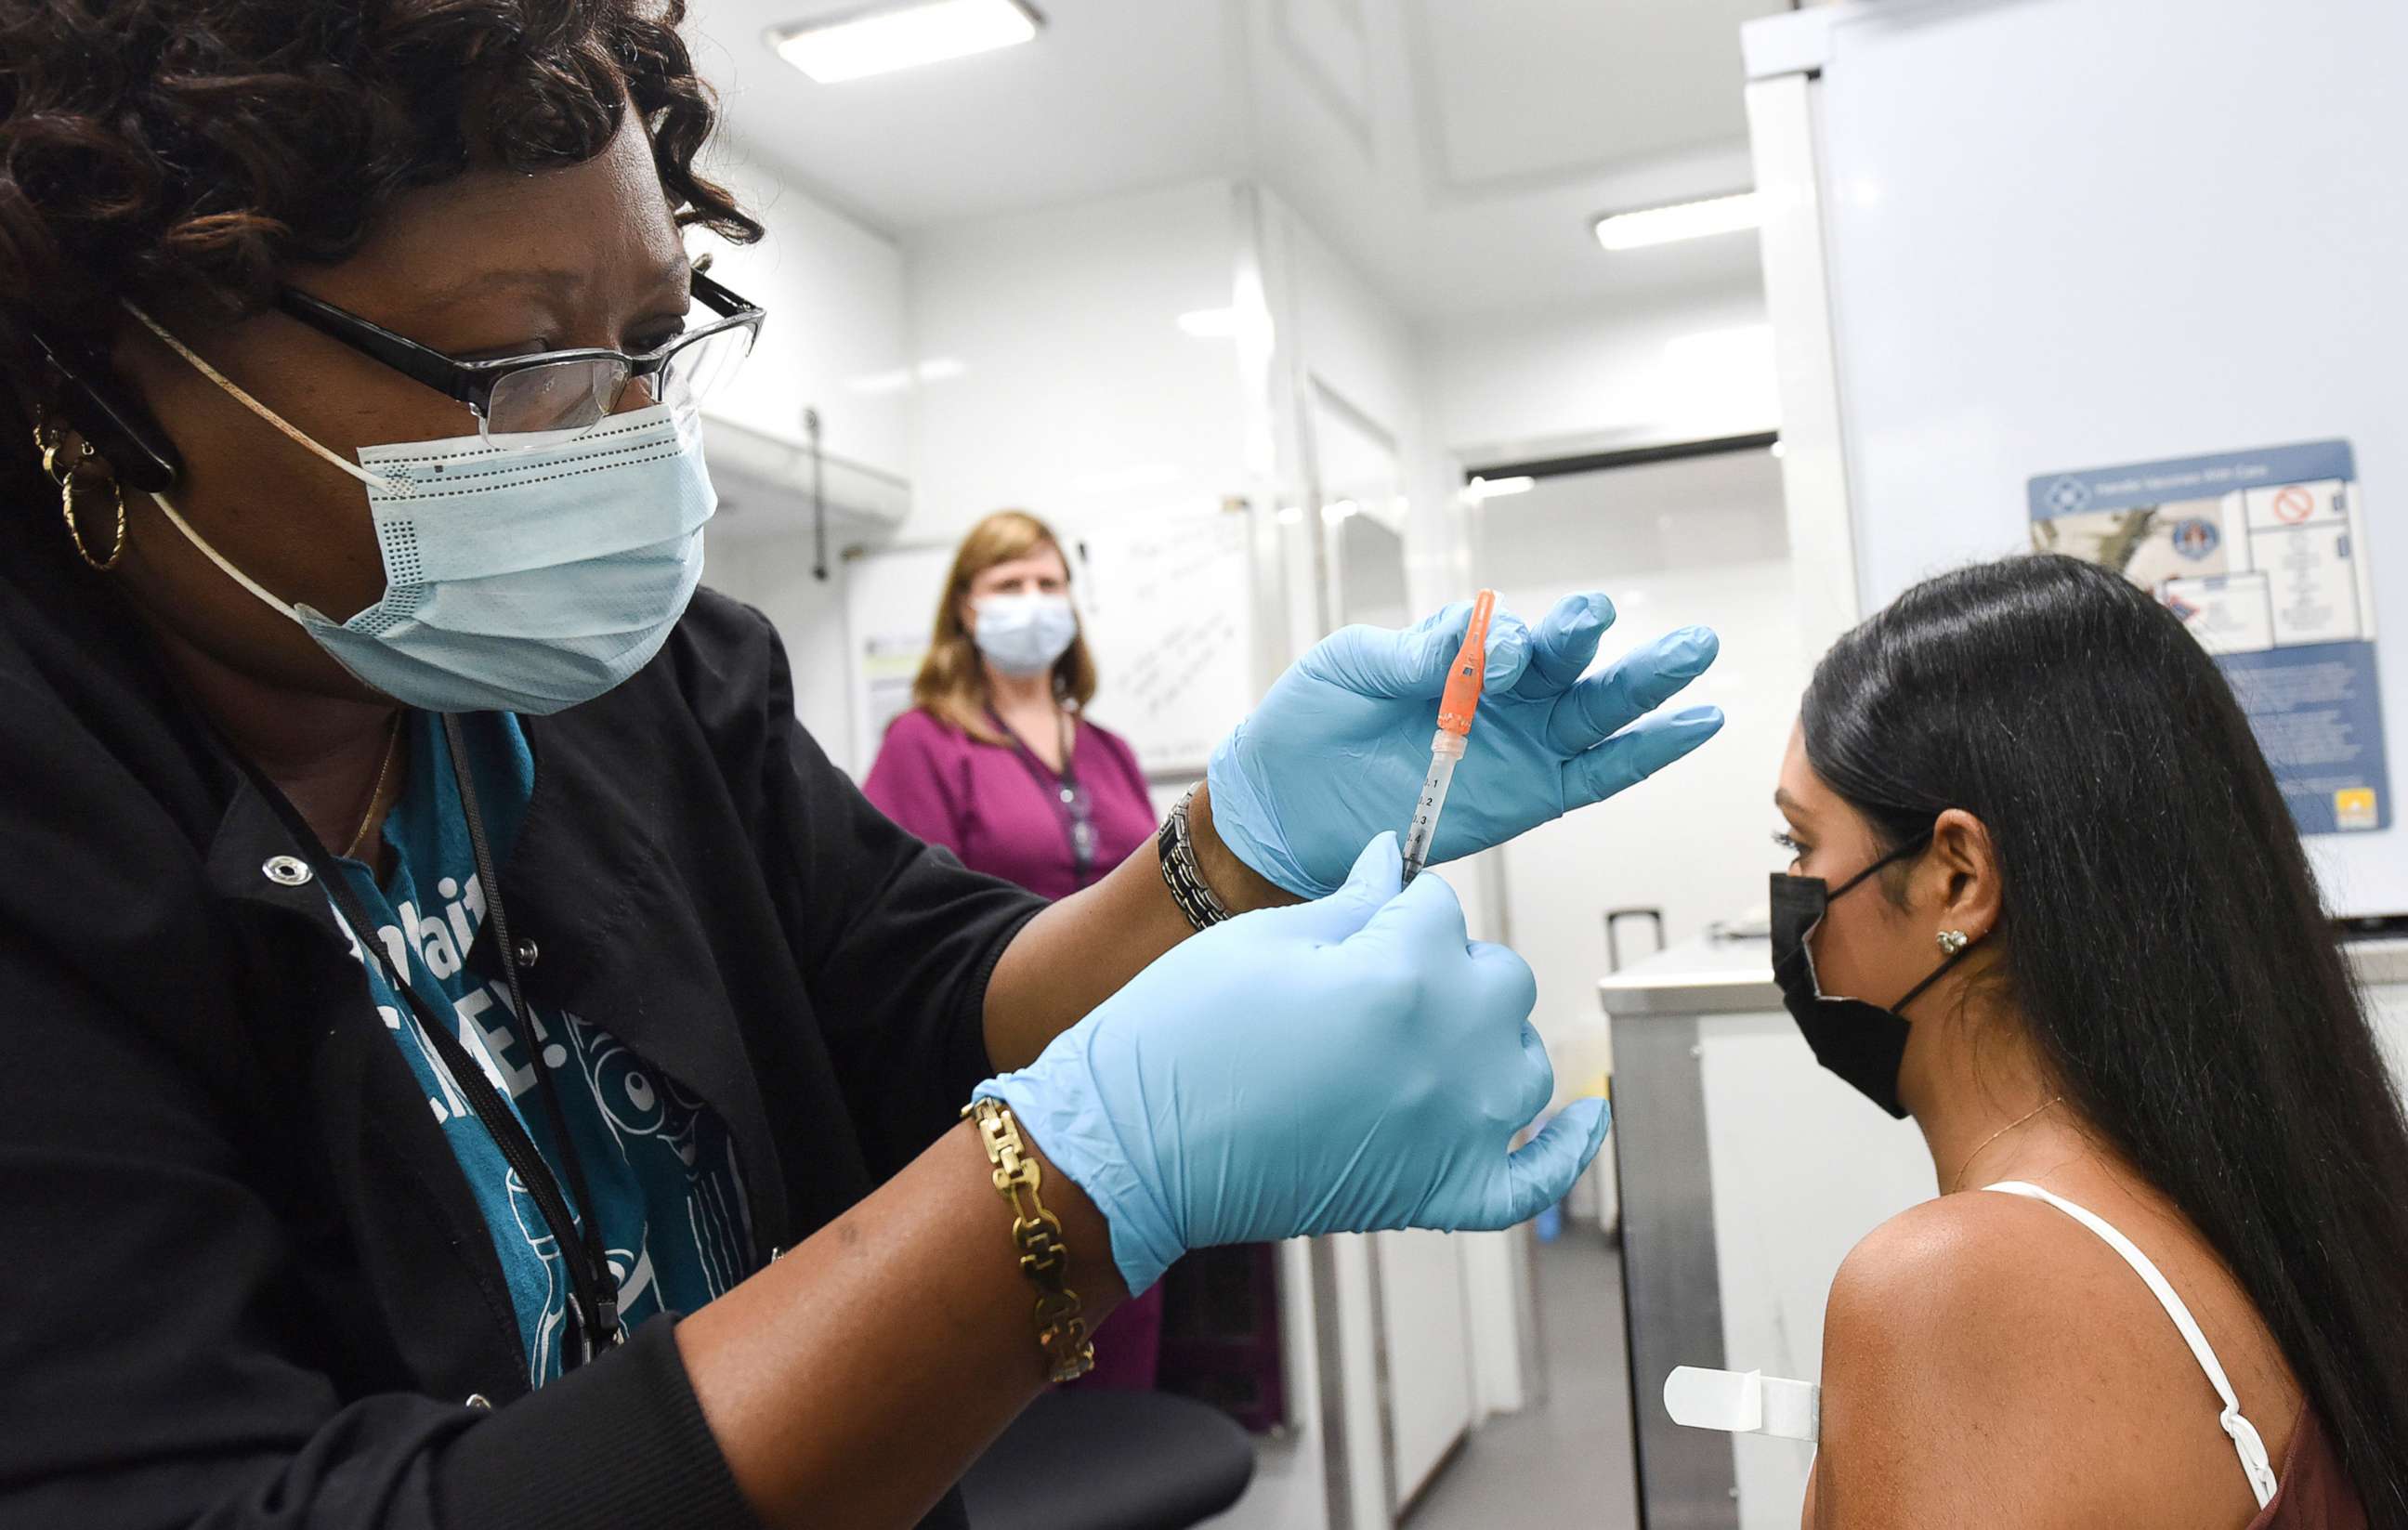 PHOTO: A nurse prepares to administer a dose of COVID-19 vaccine to a patient at a mobile vaccination event at the downtown Orlando campus of the University of Central Florida and Valencia College in Orlando, Fla., July 24, 2021.